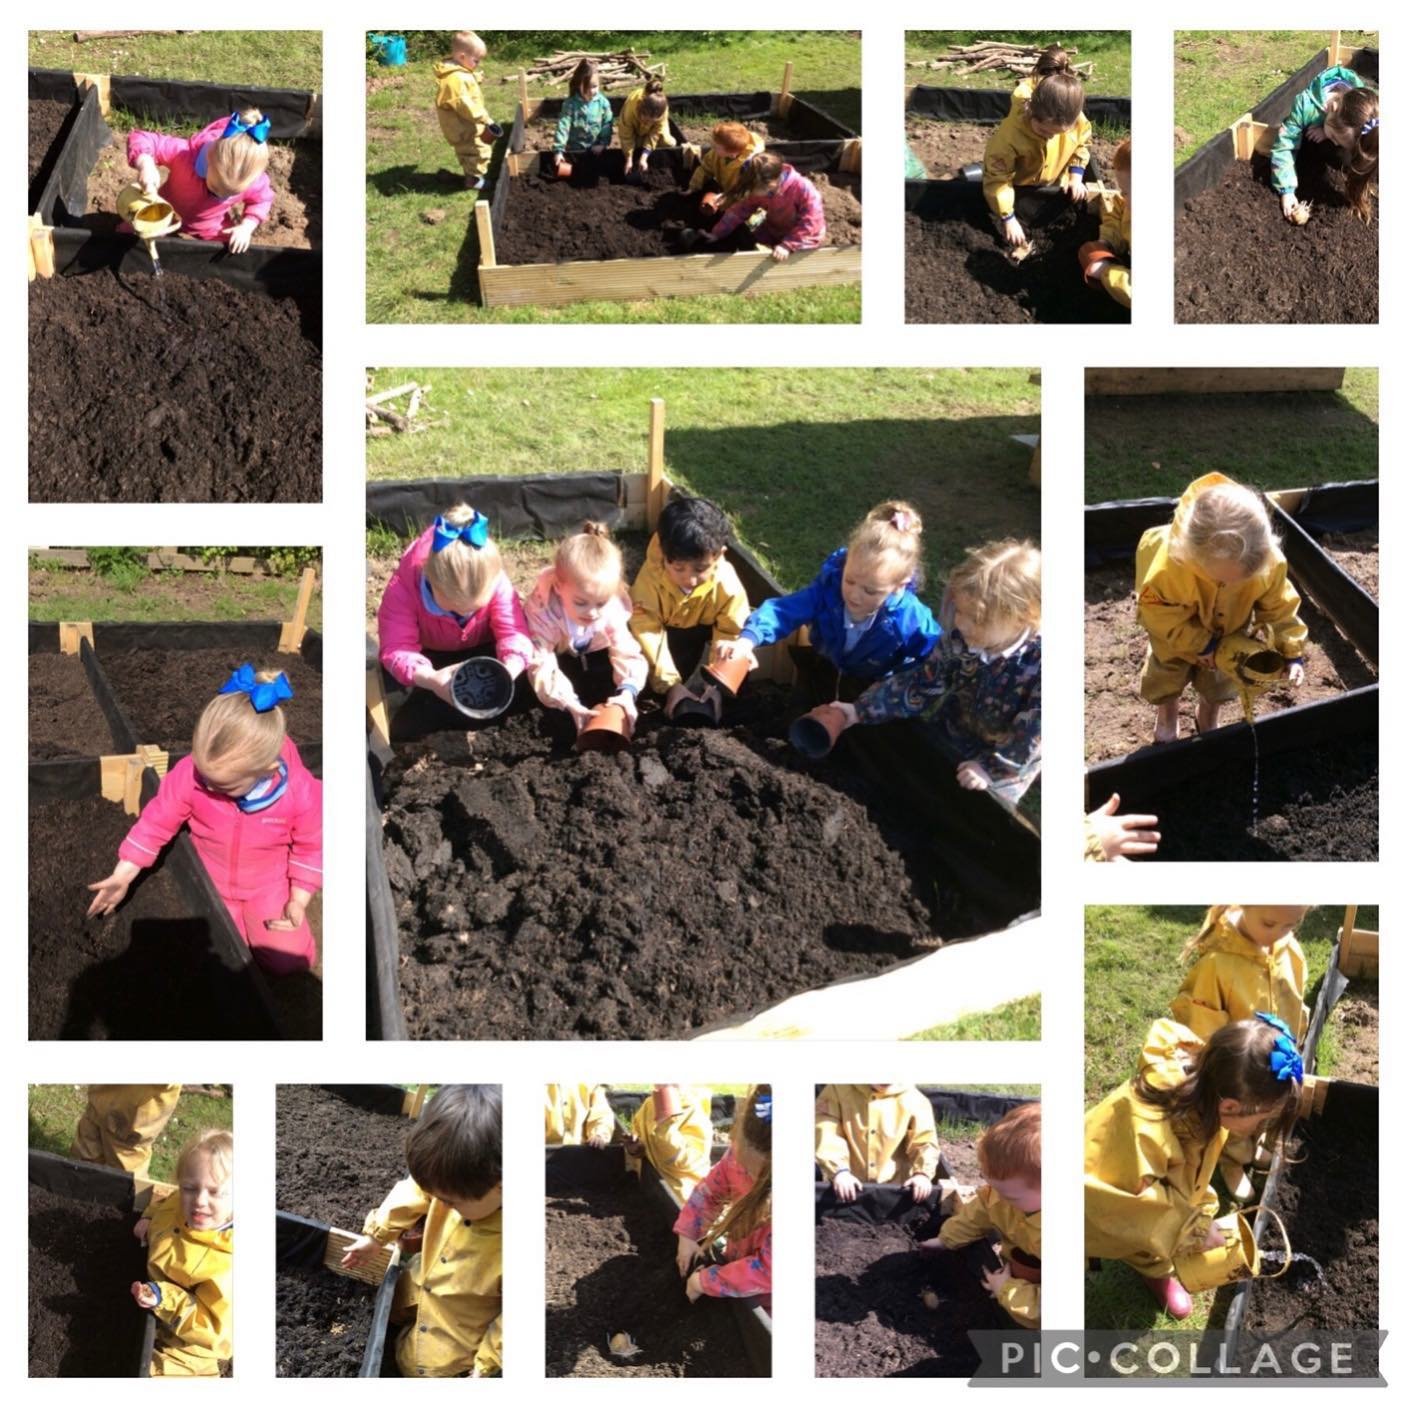 At forest school, Foundation 1 planted seeds in our new allotment that Mr Green built for us. When asked; some children already knew that seeds need sun, soil and water to grow. In small groups, the children spread compost into one section of the all